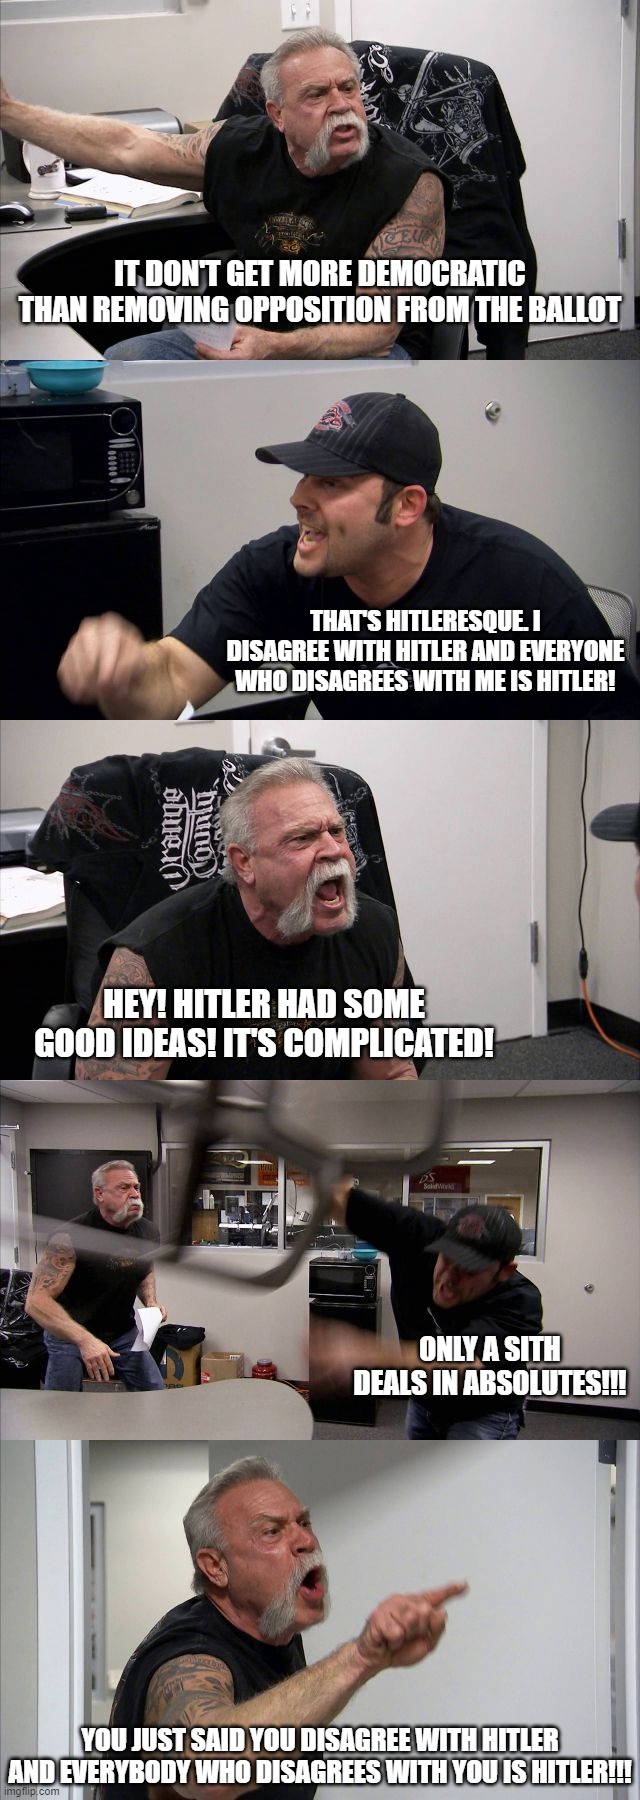 American Chopper on Hitler | IT DON'T GET MORE DEMOCRATIC THAN REMOVING OPPOSITION FROM THE BALLOT; THAT'S HITLERESQUE. I DISAGREE WITH HITLER AND EVERYONE WHO DISAGREES WITH ME IS HITLER! HEY! HITLER HAD SOME GOOD IDEAS! IT'S COMPLICATED! ONLY A SITH DEALS IN ABSOLUTES!!! YOU JUST SAID YOU DISAGREE WITH HITLER AND EVERYBODY WHO DISAGREES WITH YOU IS HITLER!!! | image tagged in memes,american chopper argument | made w/ Imgflip meme maker